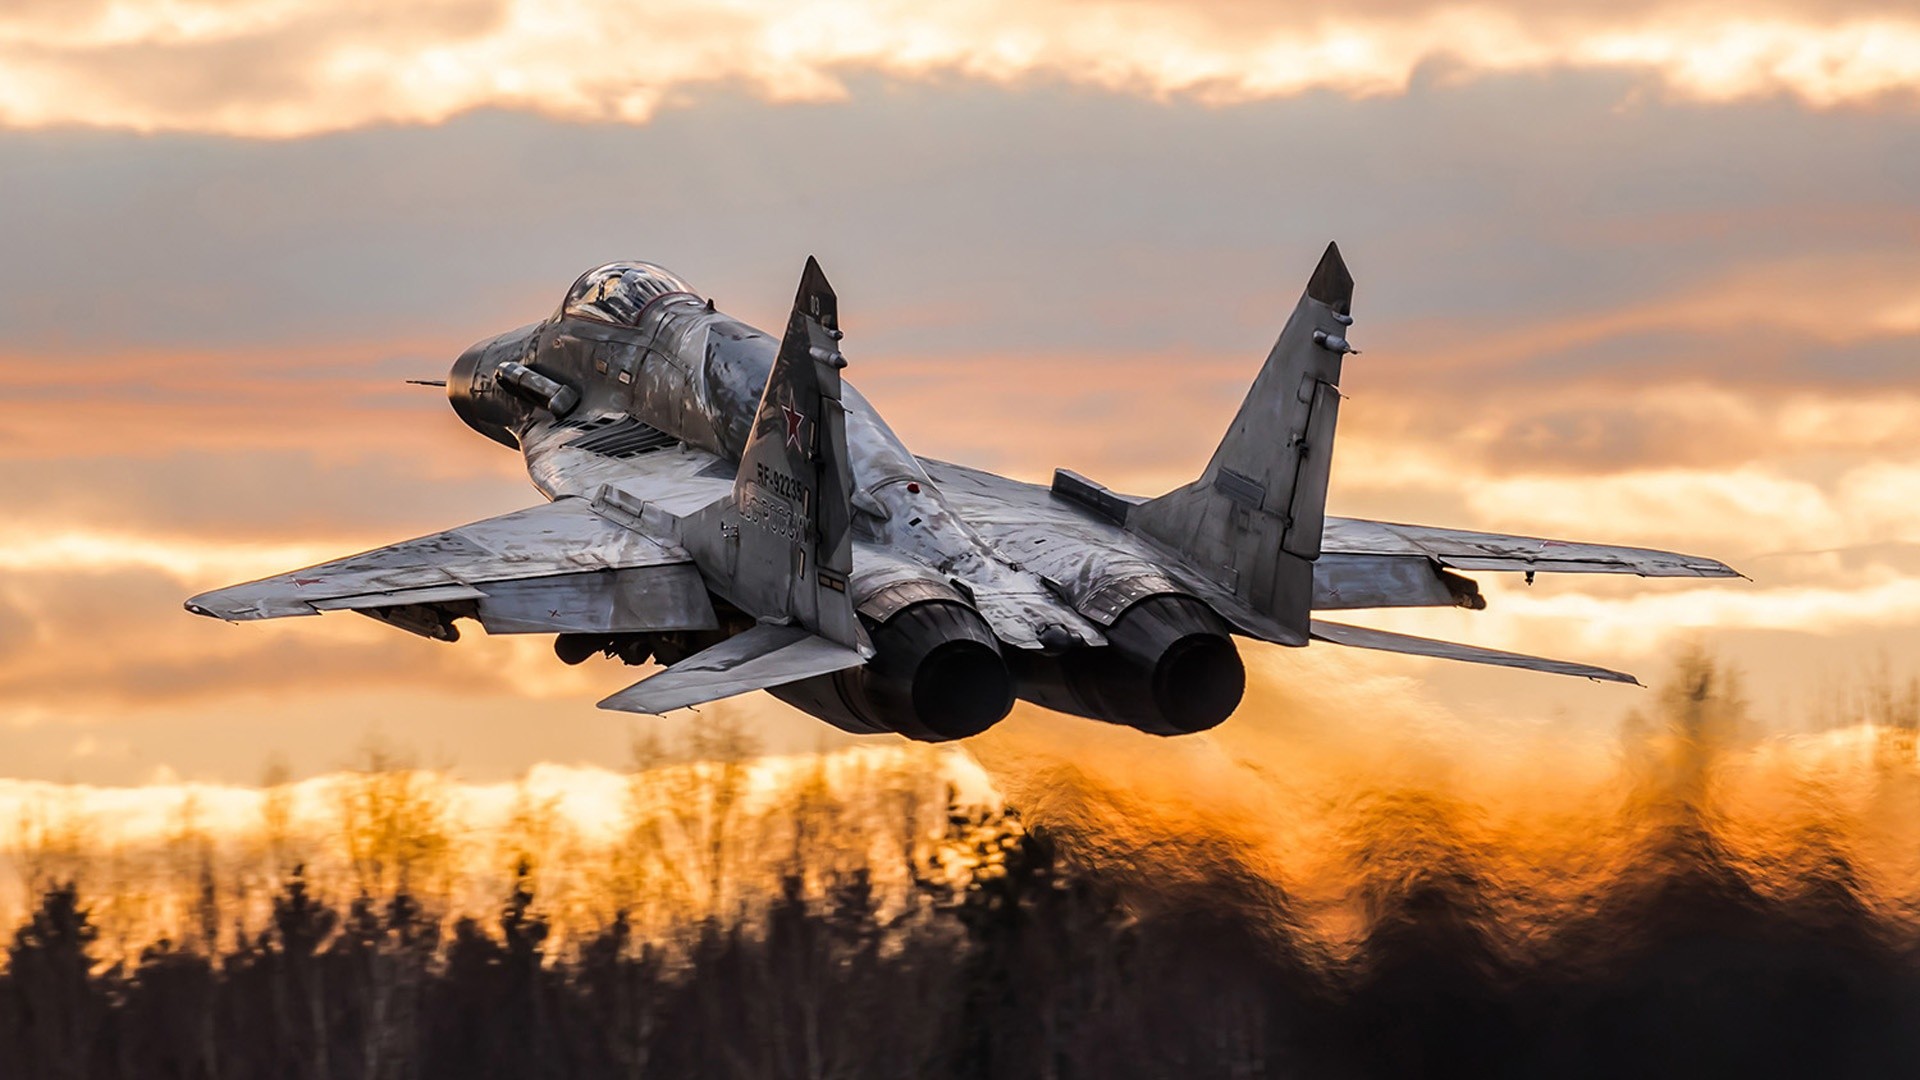 Wallpaper Of Aircraft, Jet Fighter, Mikoyan Mig 29, - Fighter Jet Wallpaper 4k - HD Wallpaper 